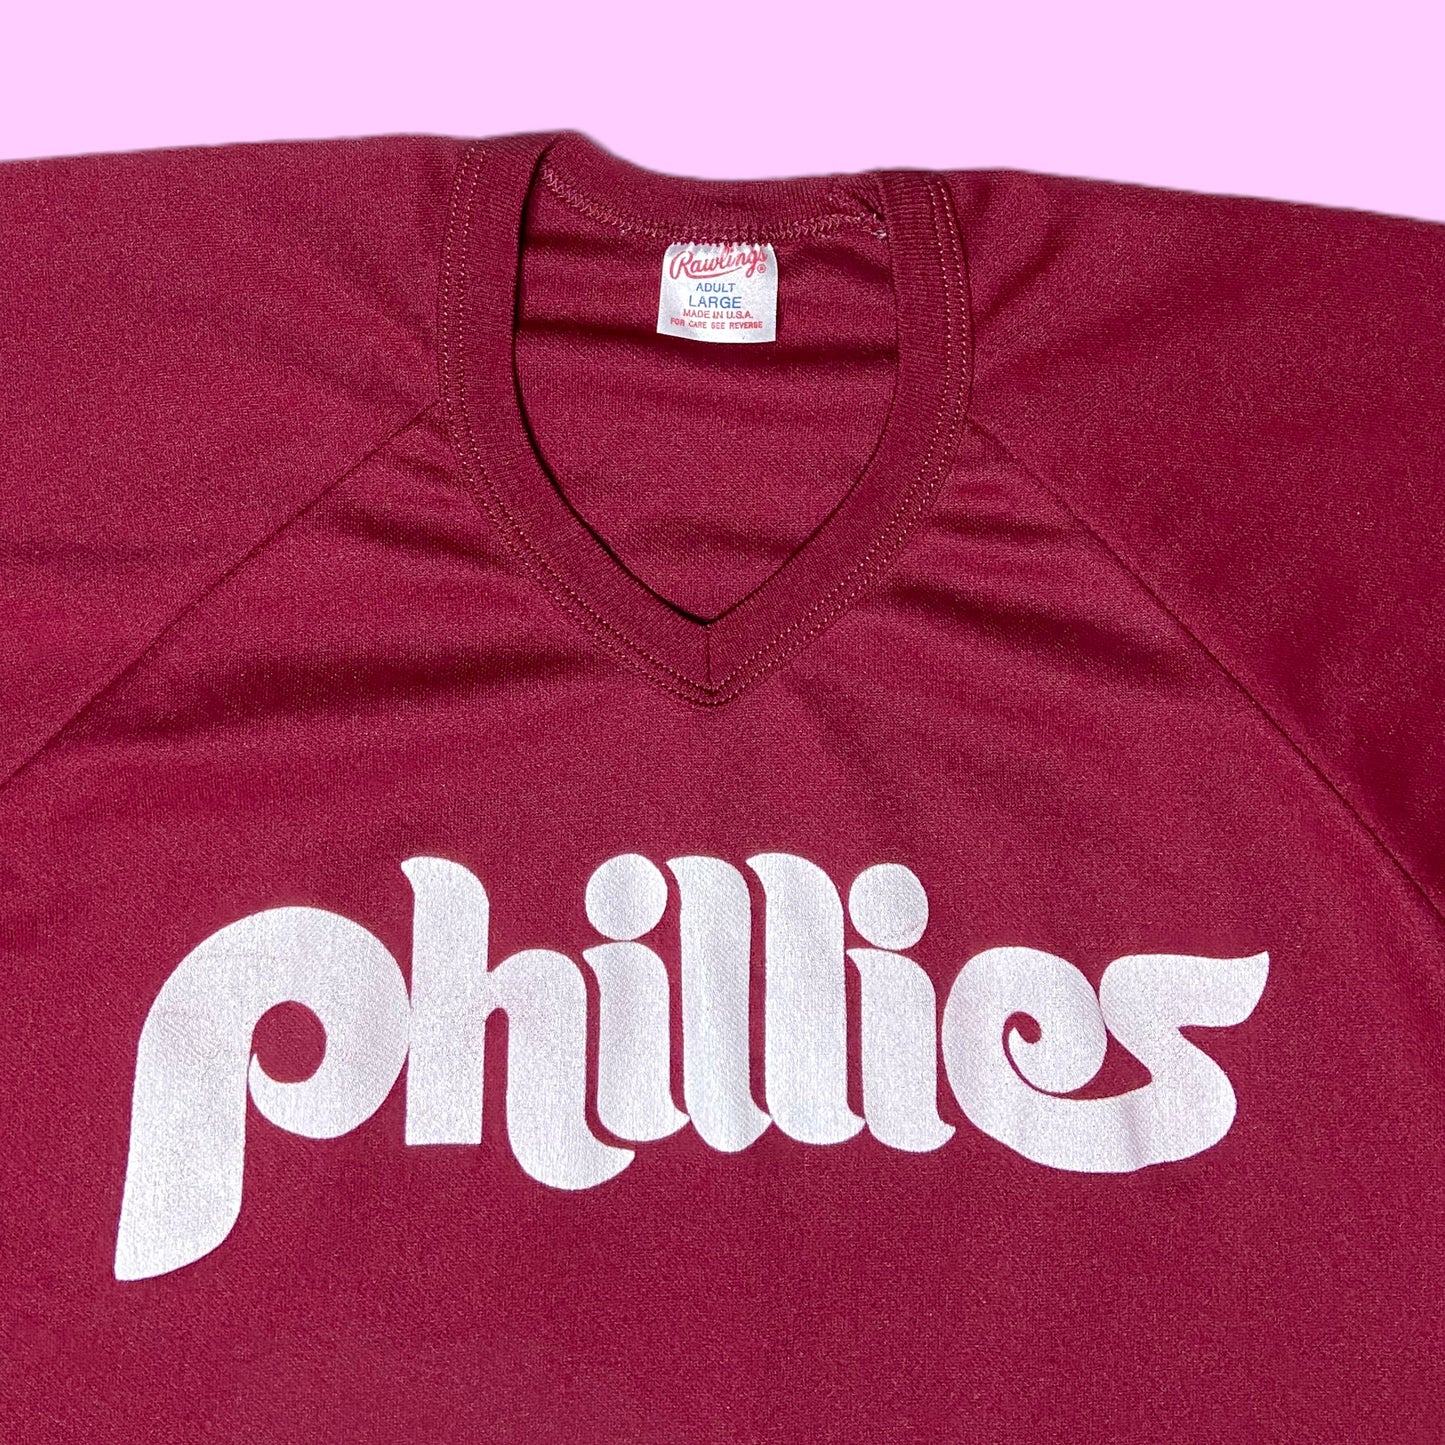 Vintage Phillies Rawlings Jersey - S